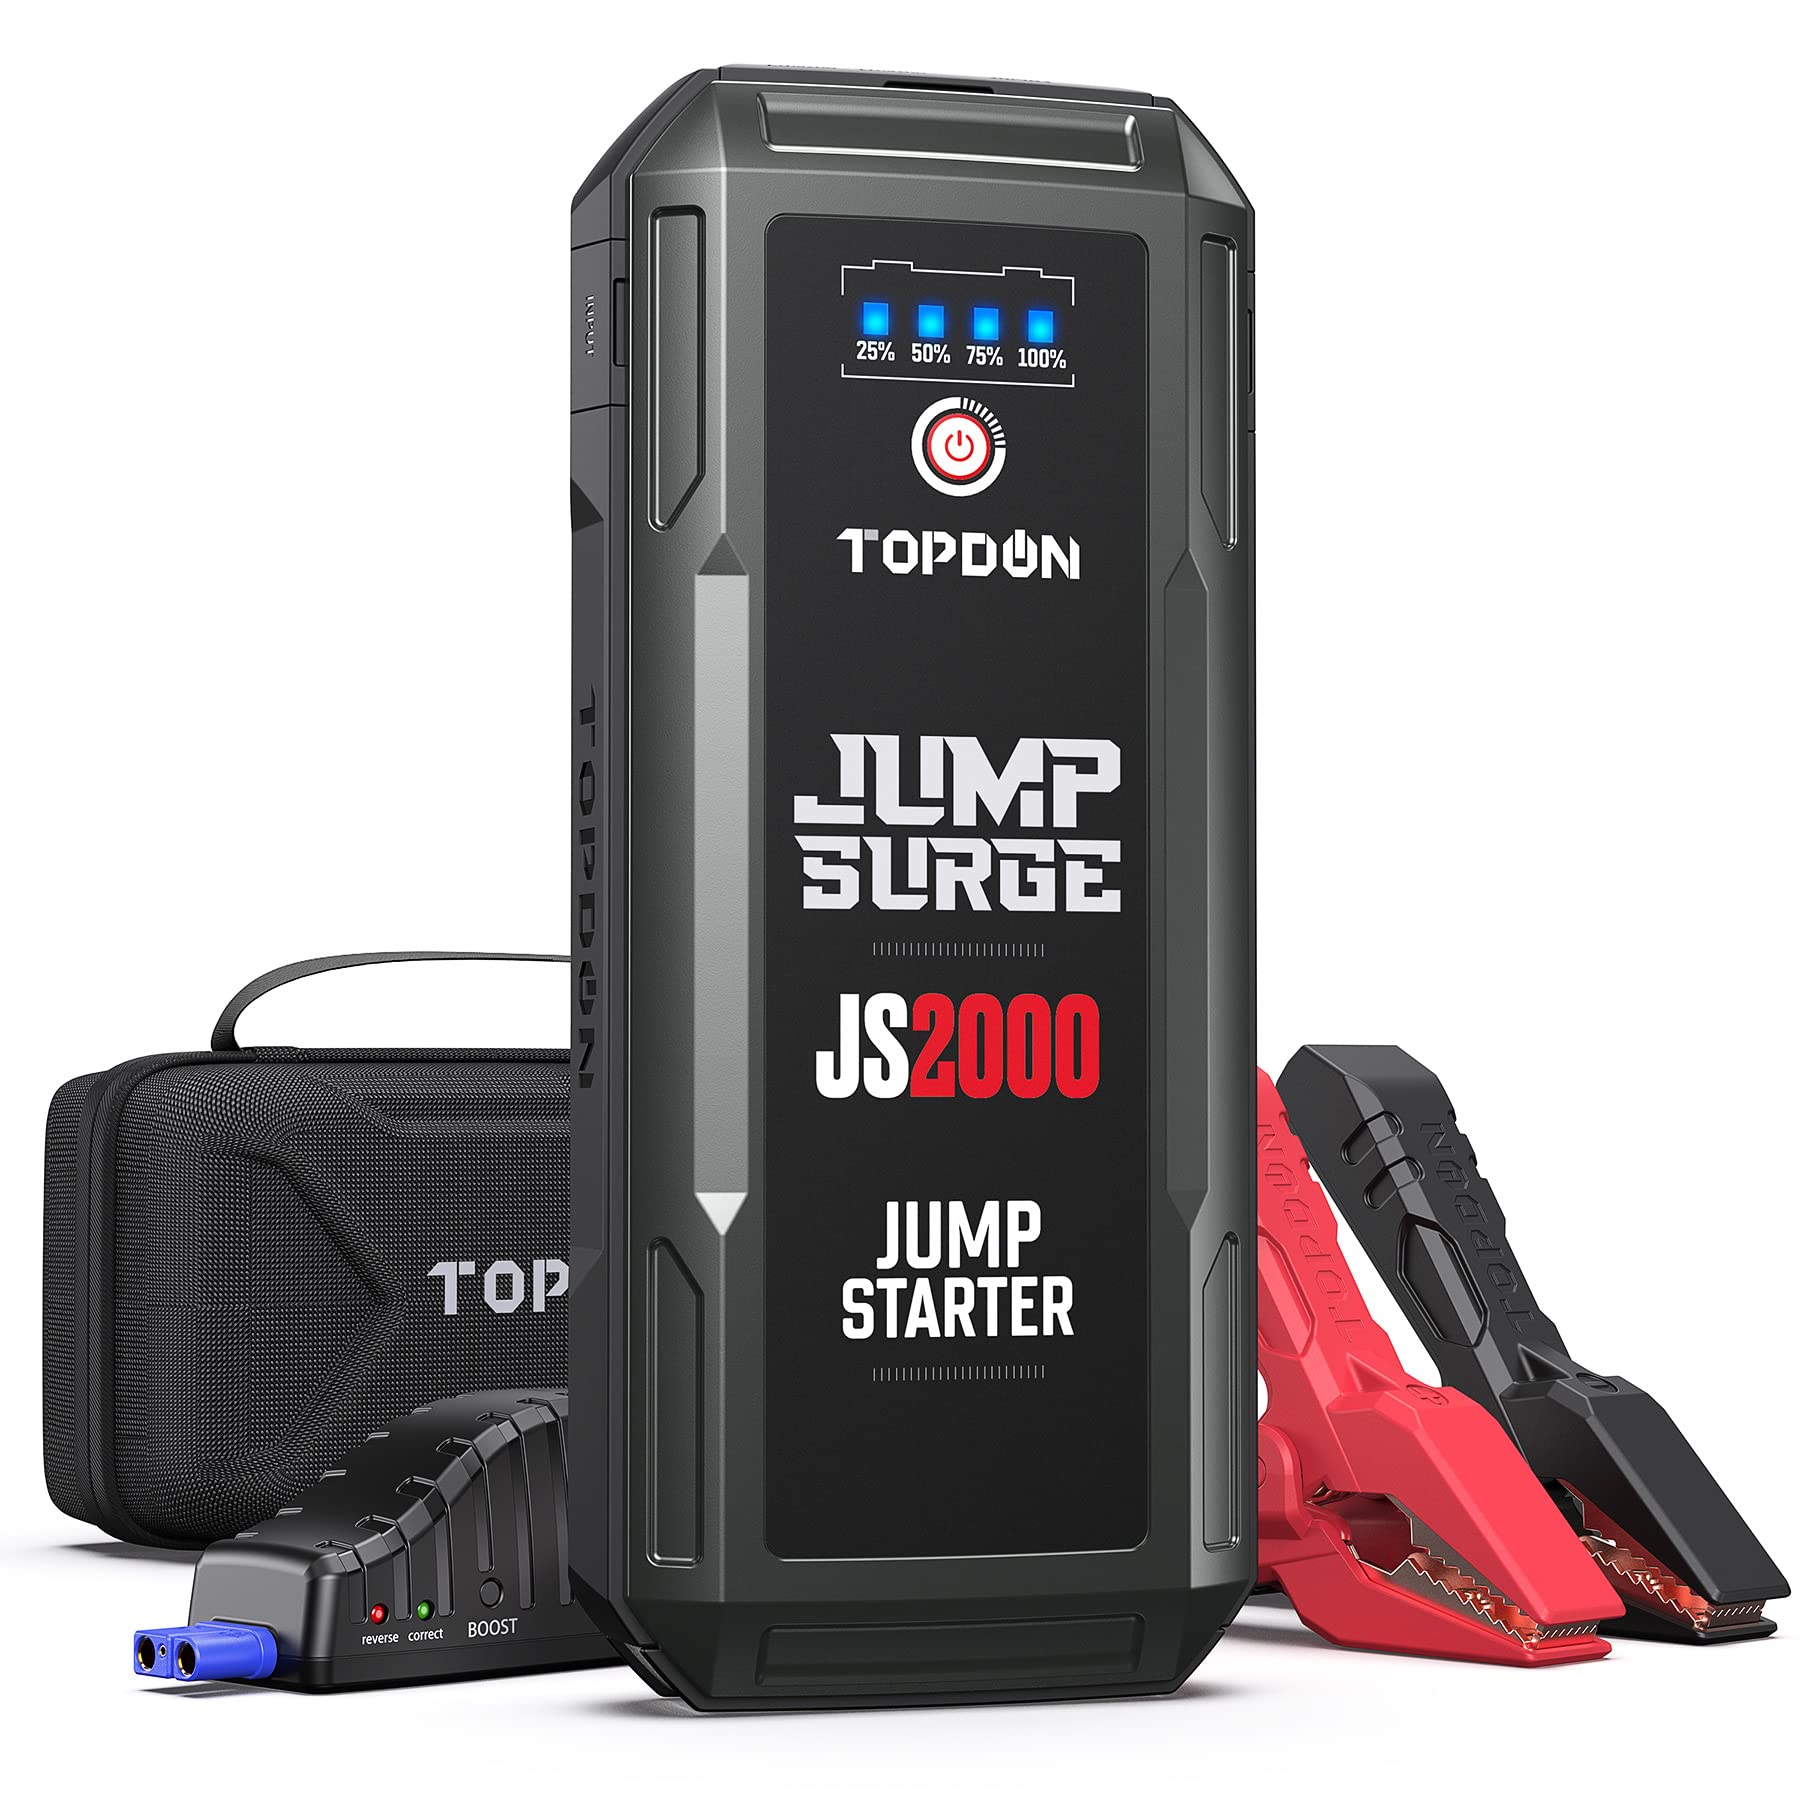 Amazon: Car Battery Jump Starter, TOPDON 2000A Peak Battery Jump Starter for Up to 8L Gas/6L Diesel Engines, 12V Portable Battery Booster Pack with Jumper Cables